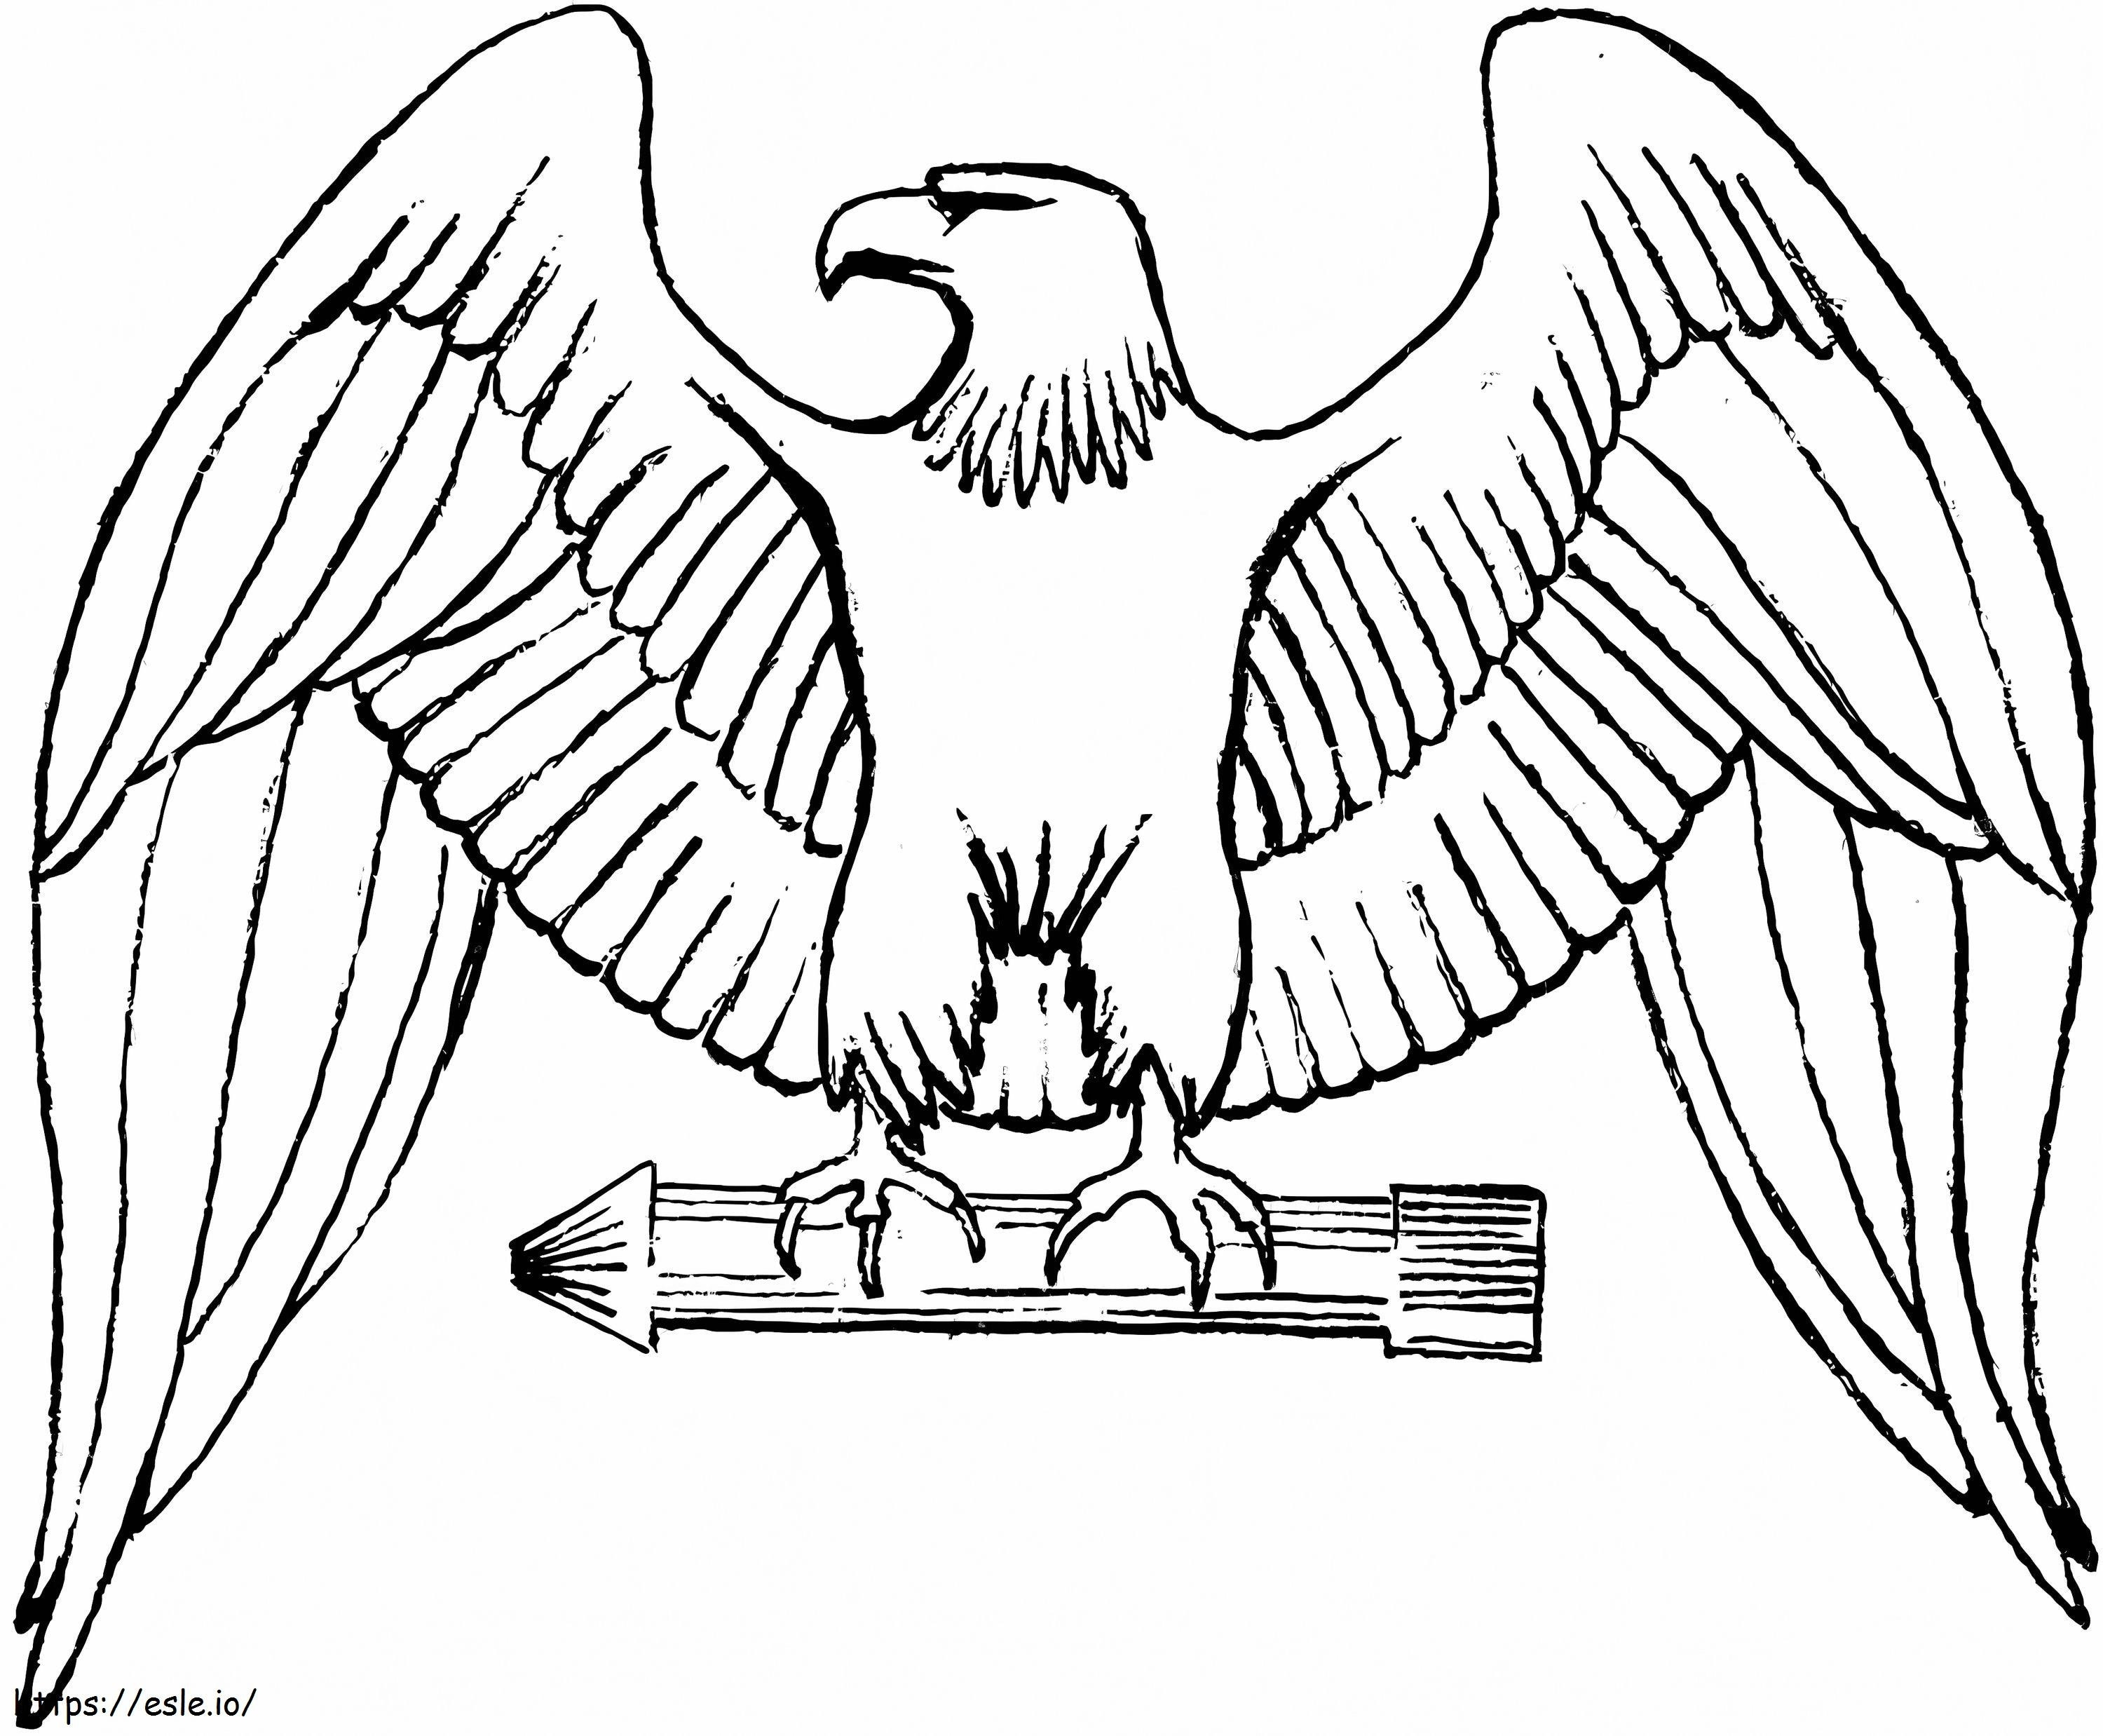 Carrying Eagle Coloring Page coloring page